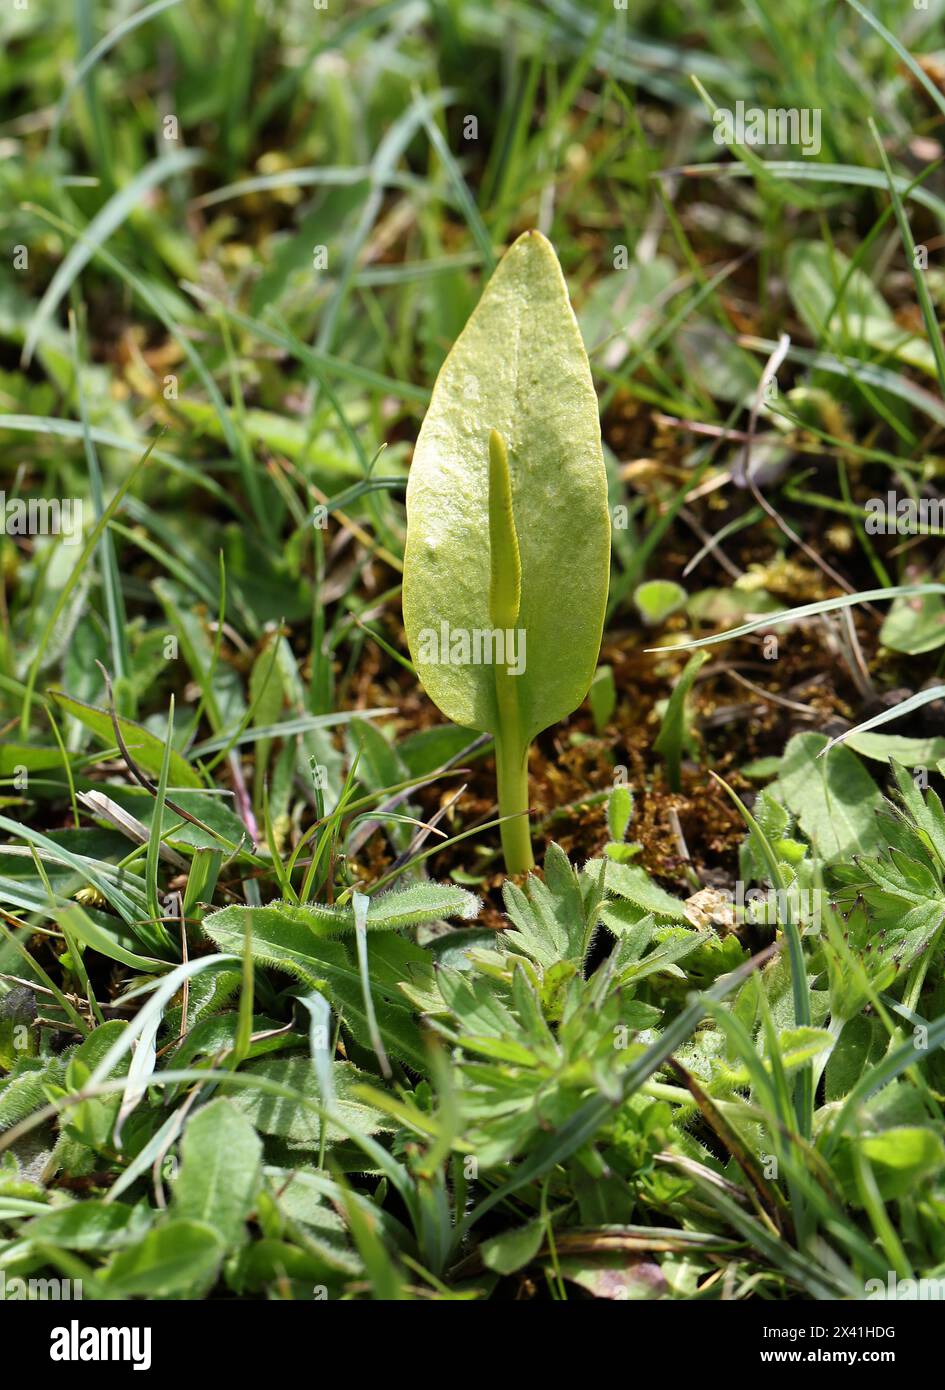 Adder's-tongue, Southern Adder's-tongue or Adder's-tongue Fern, Ophioglossum vulgatum, Ophioglossaceae. Bernwood Meadows, Oxfordshire, UK. Stock Photo